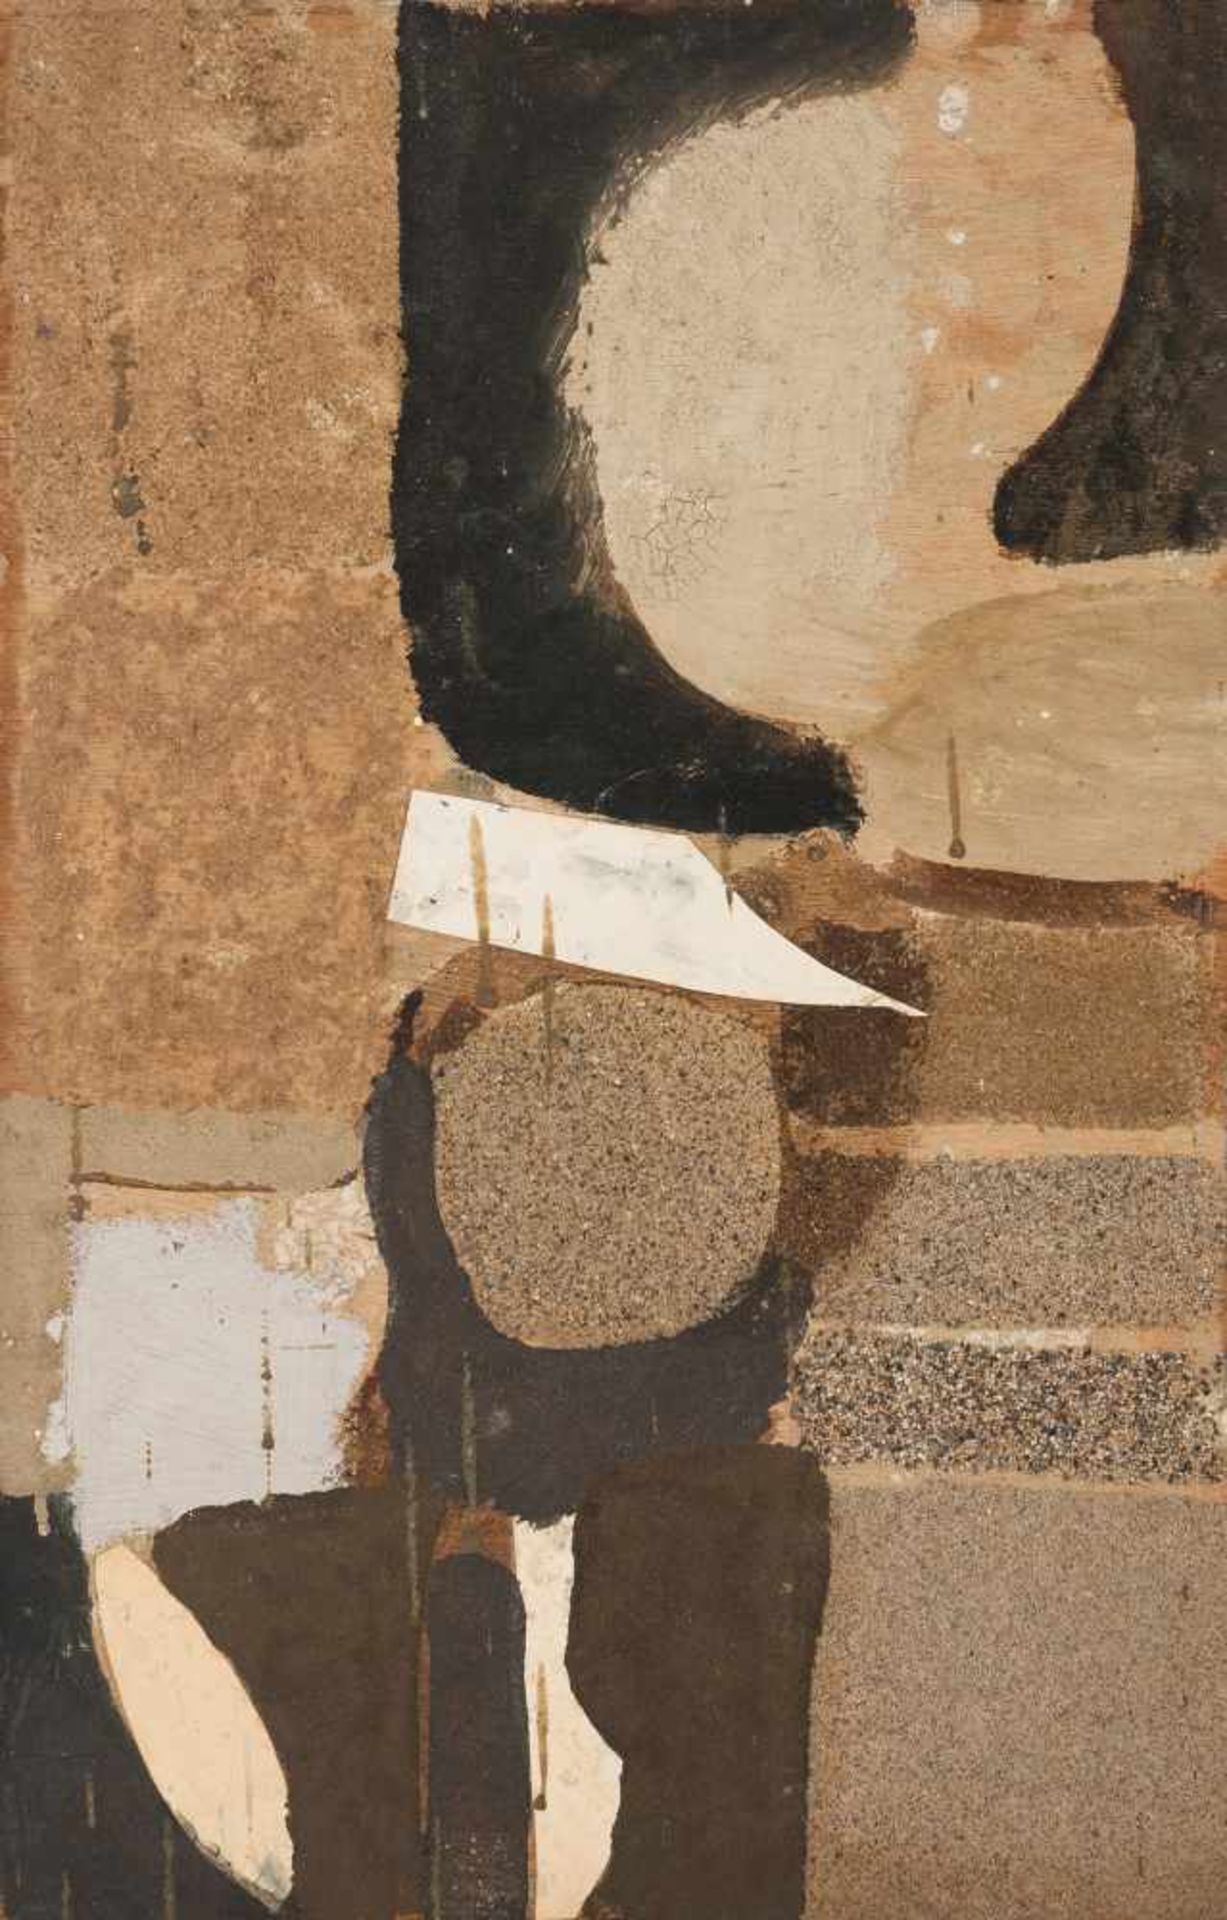 Alfred Reth (Budapest, 1884 - Paris, 1966) Mixed media and sand on panel. Circa 1945. Provenance: